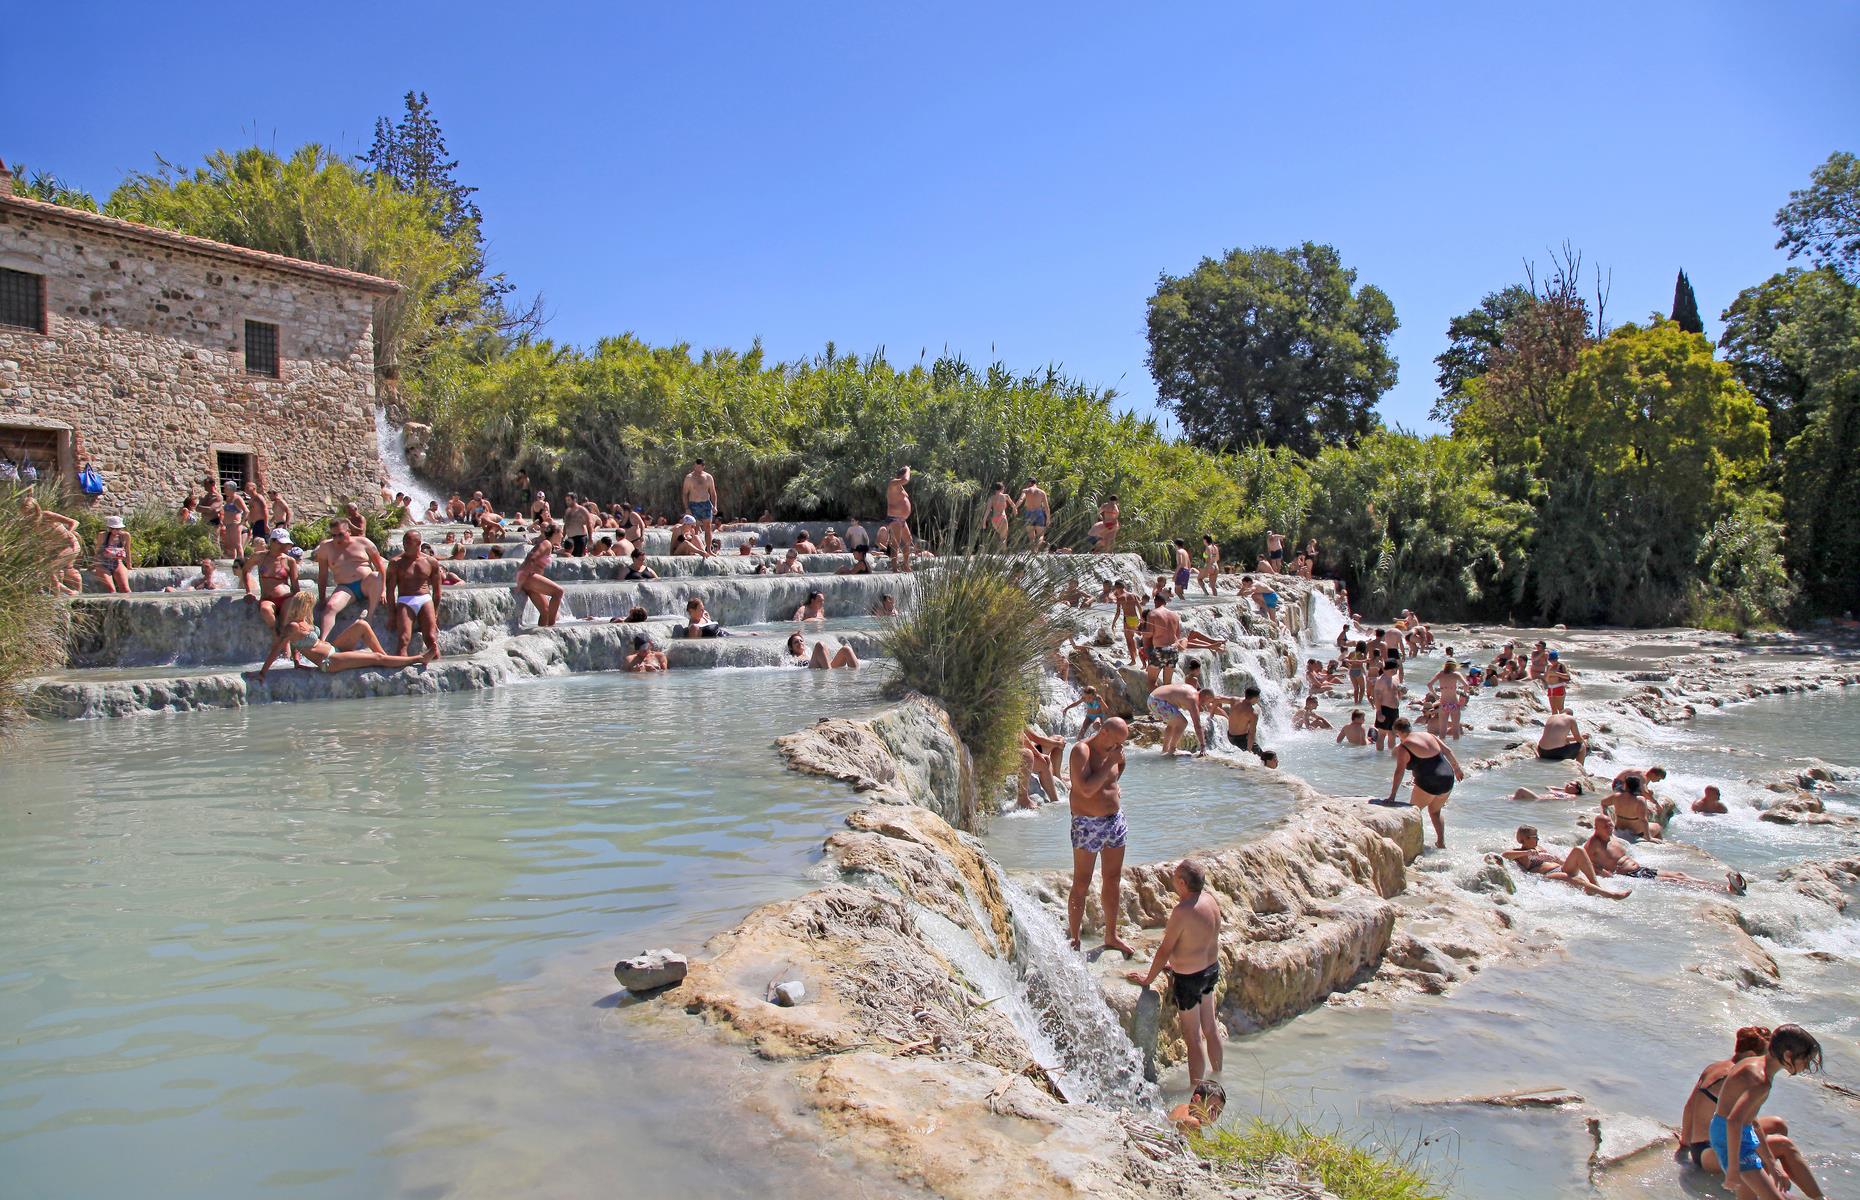 <p>Italians have floated in these naturally carved pools since Roman times in the firm belief that the thermal waters have healing properties. Wallow in the 99°F waters as you gaze out over the Tuscan countryside. Best of all, entry is free. You’ll find Cascate Del Mulino just outside Saturnia. </p>